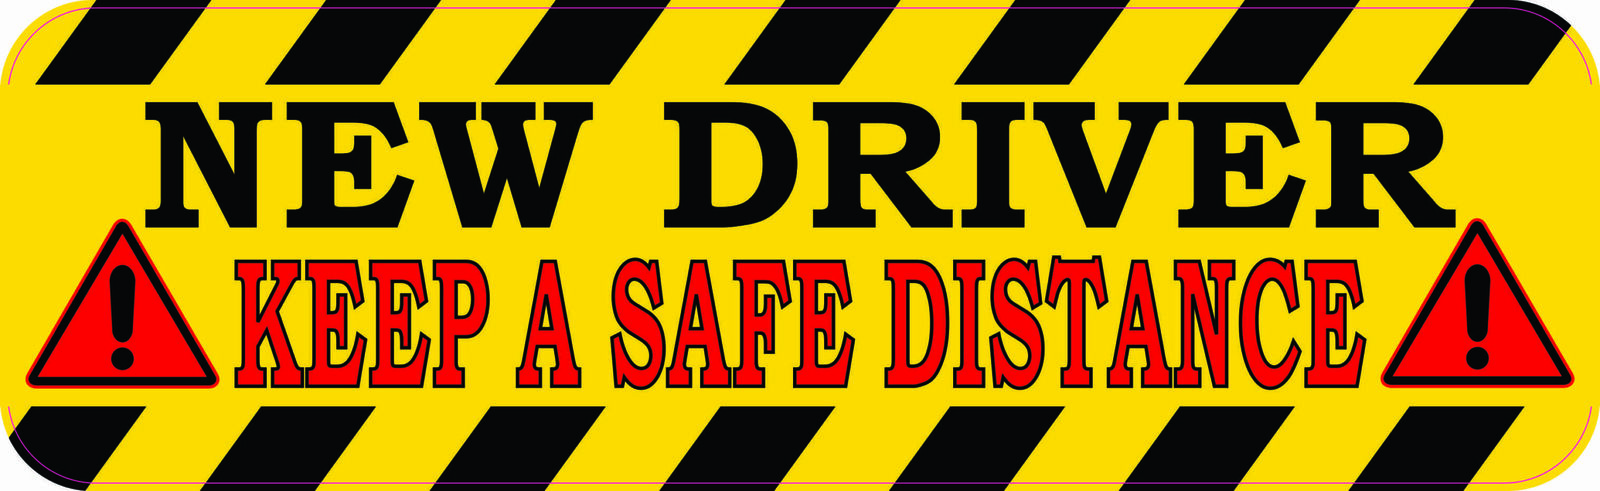 10in x 3in Keep a Safe Distance New Driver Vinyl Sticker